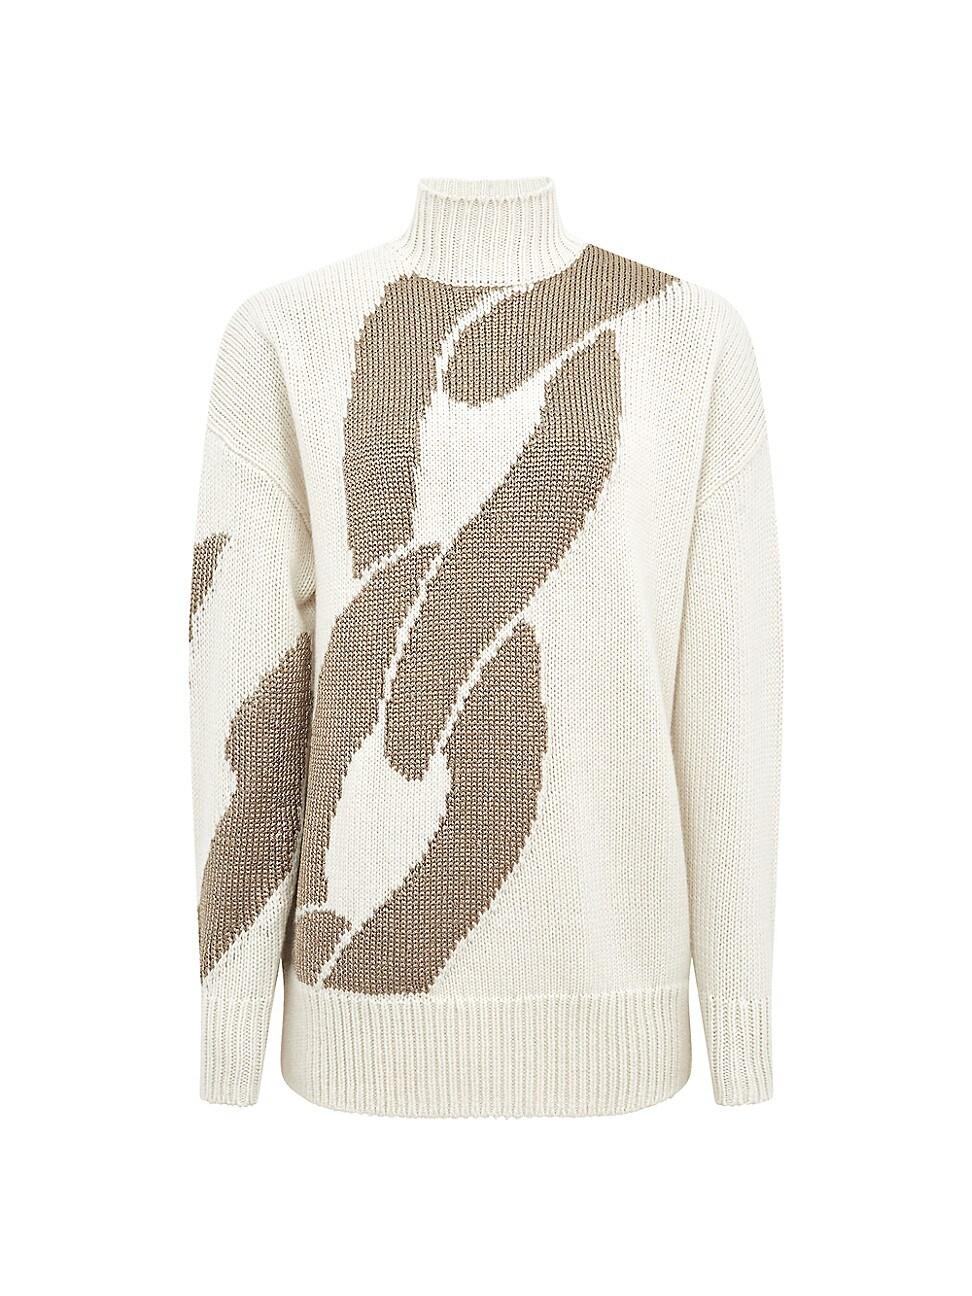 Reiss Pia Chain Intarsia Knit Sweater in White | Lyst